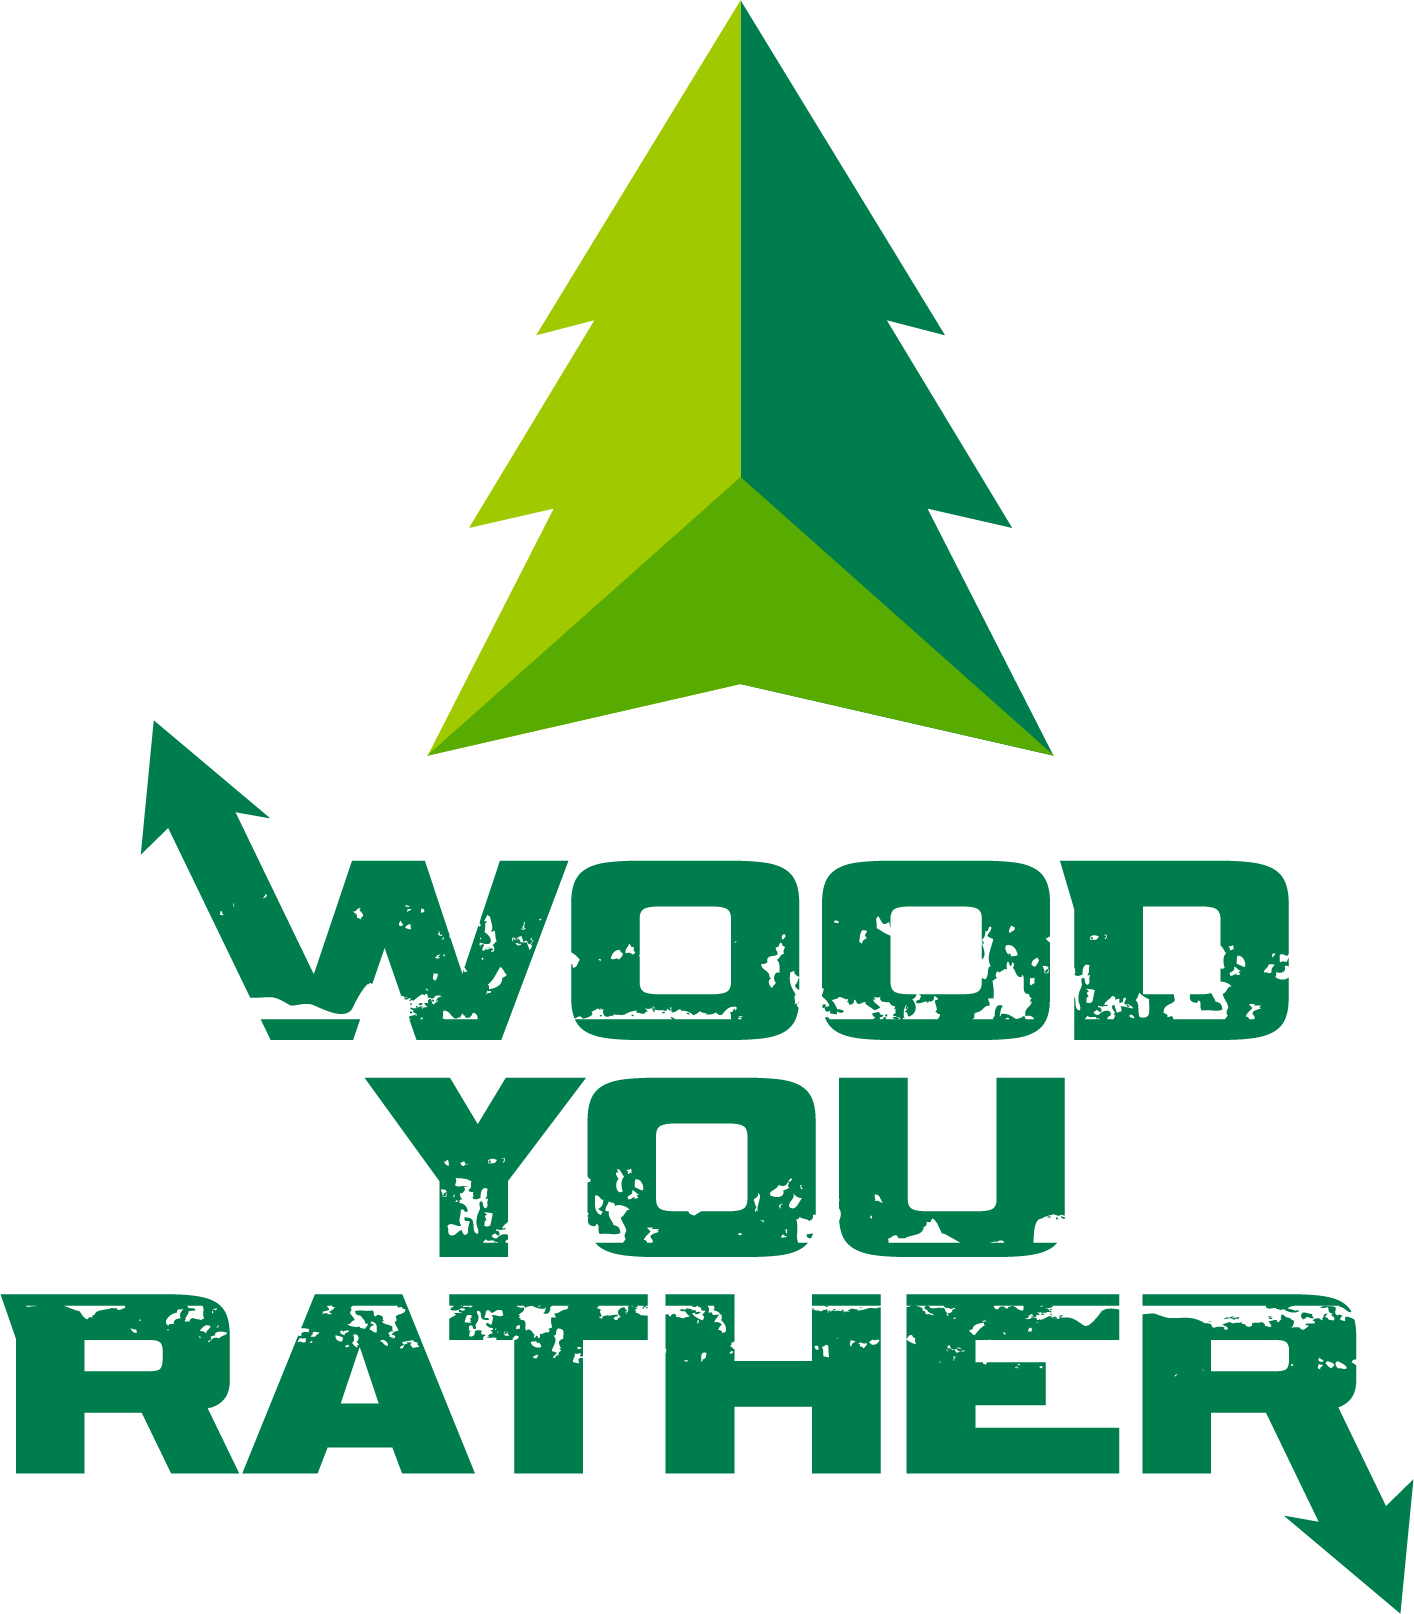 Wood You Rather race logo vertical